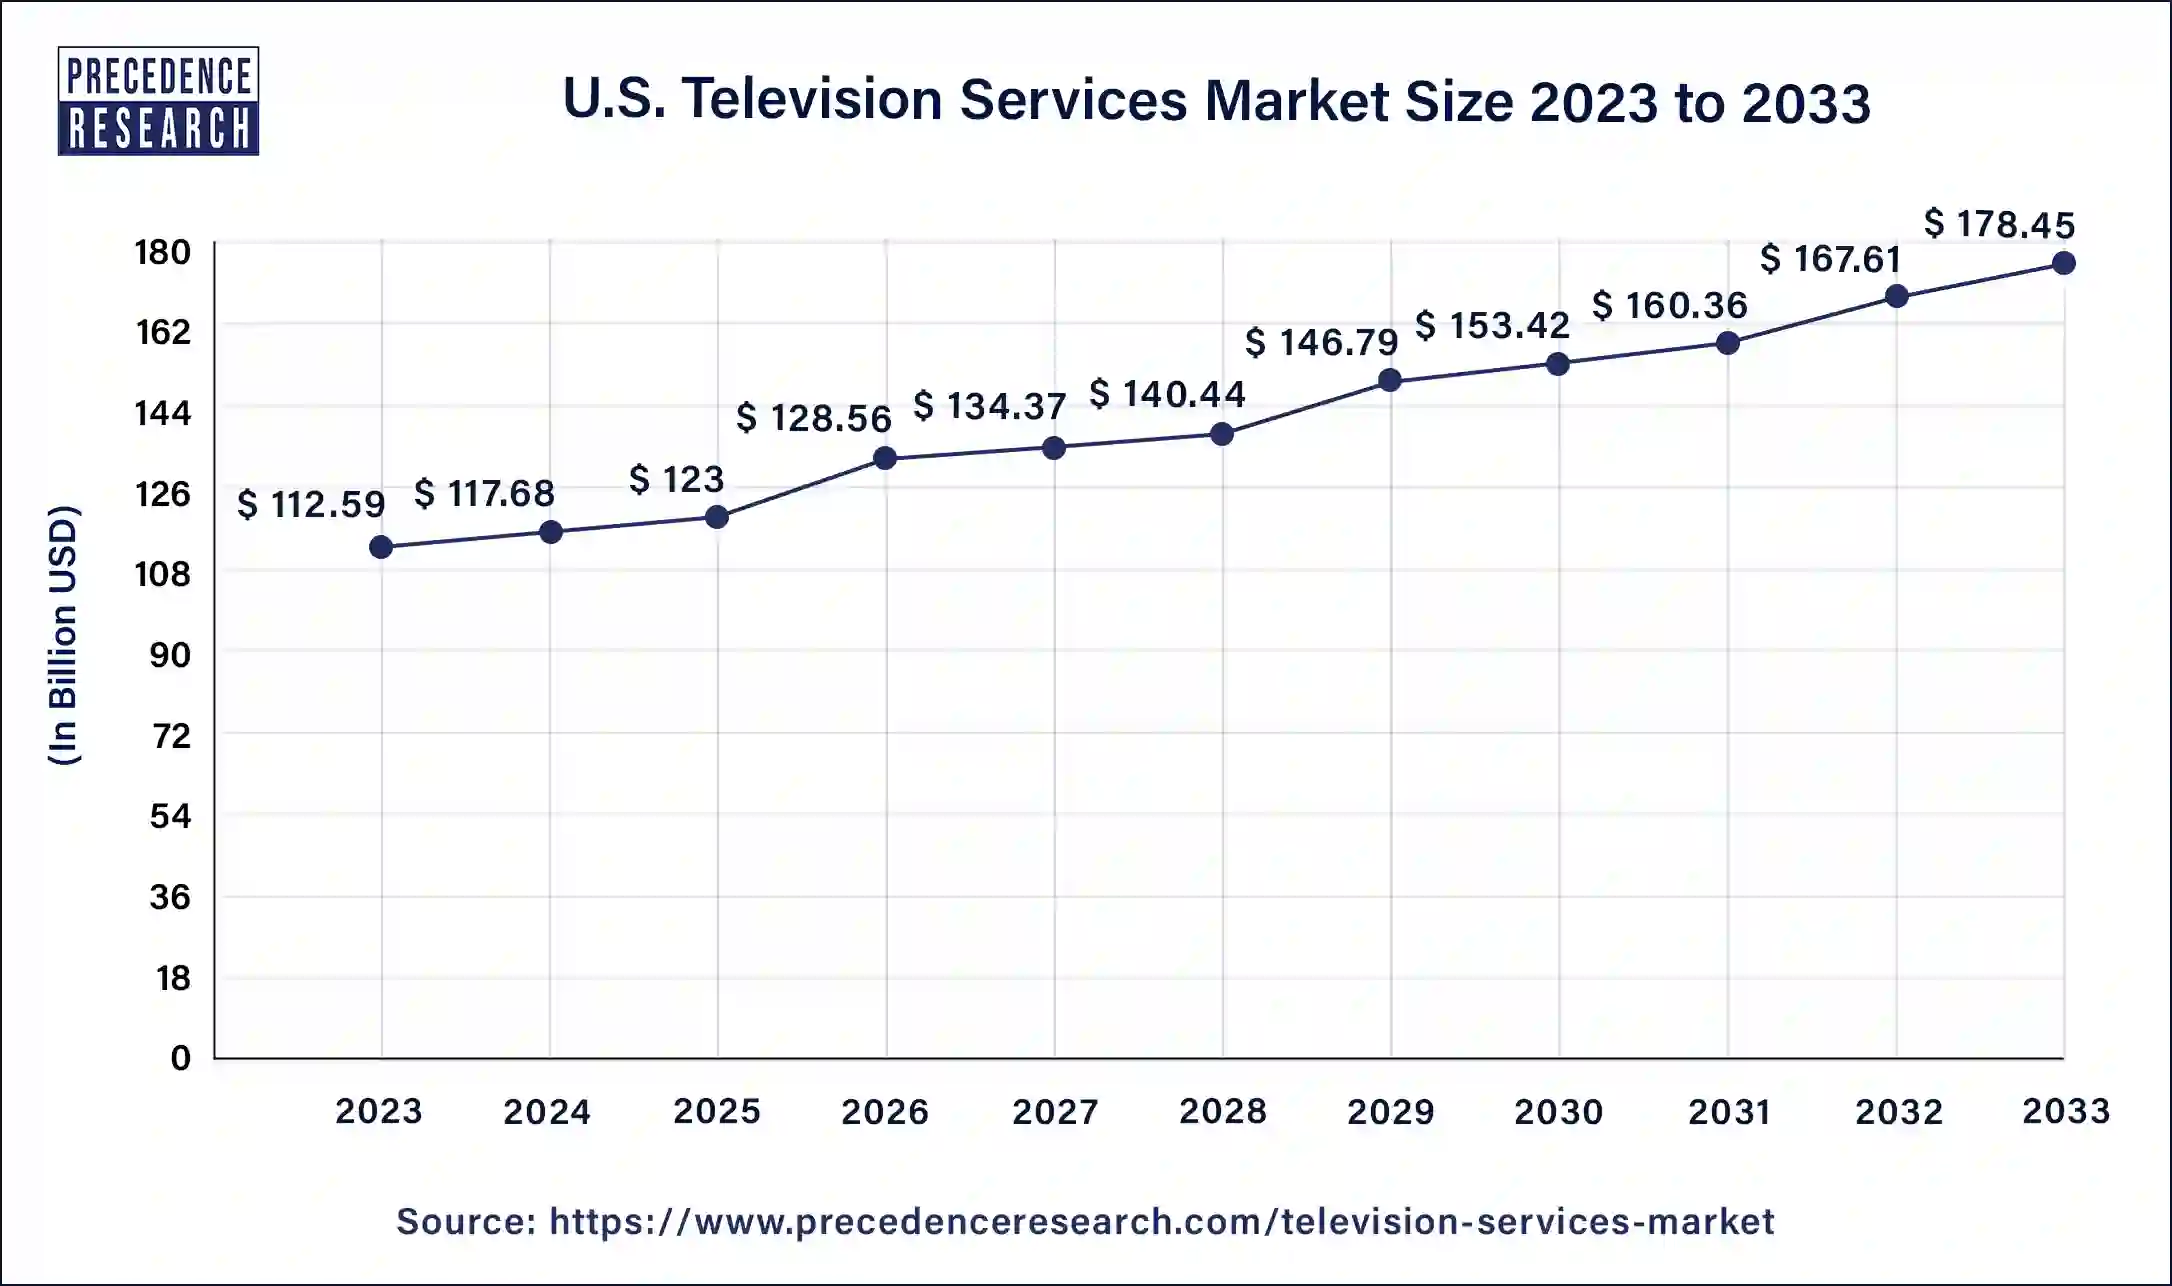 U.S. Television Services Market Size 2024 to 2033